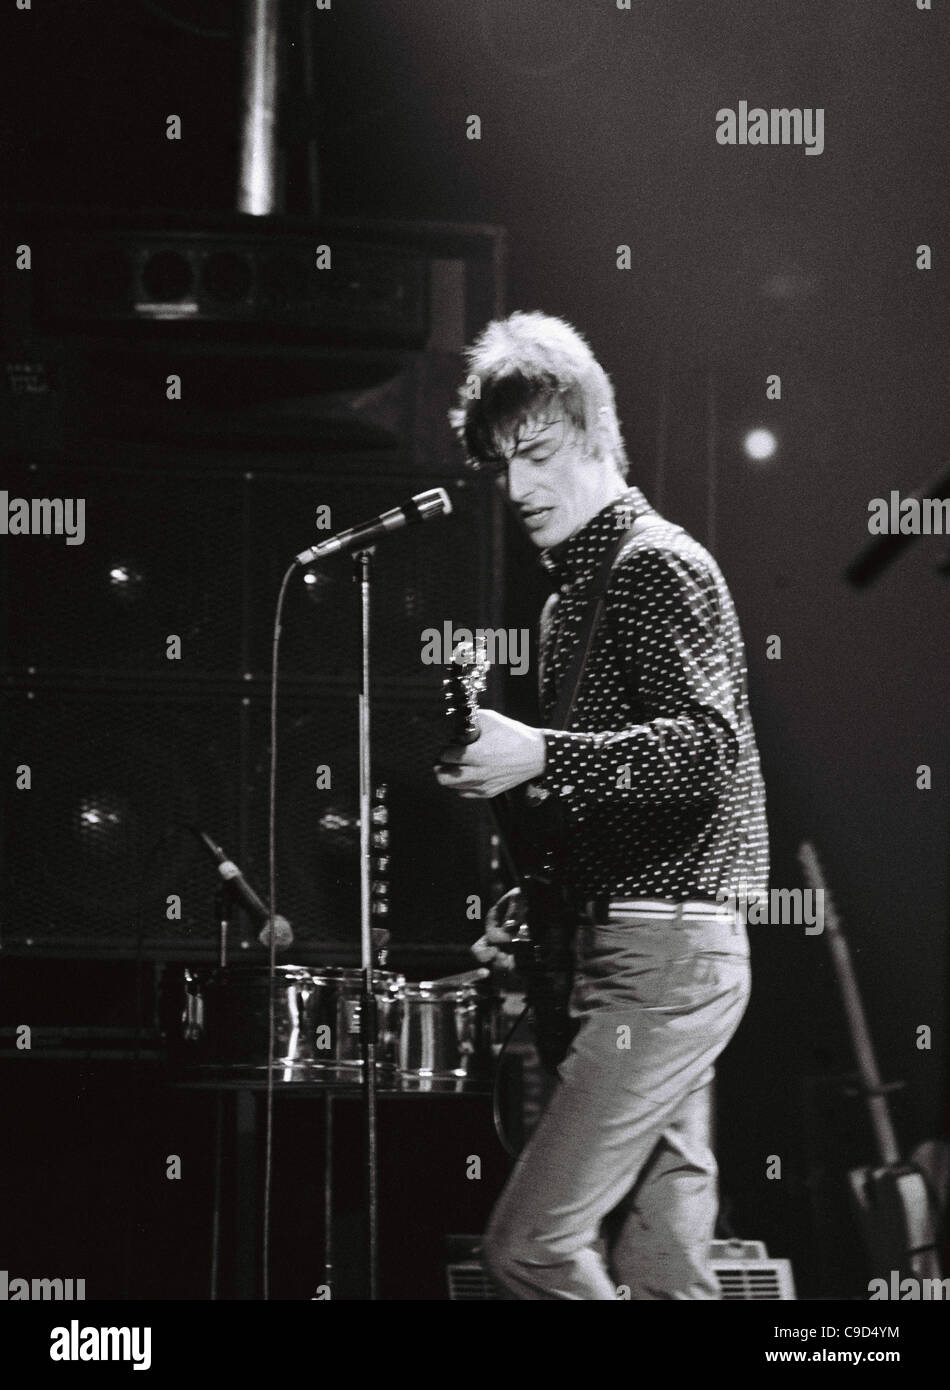 Paul Weller of The Jam at the Hammersmith Palais in Dec 1981 for a pro CND show Stock Photo